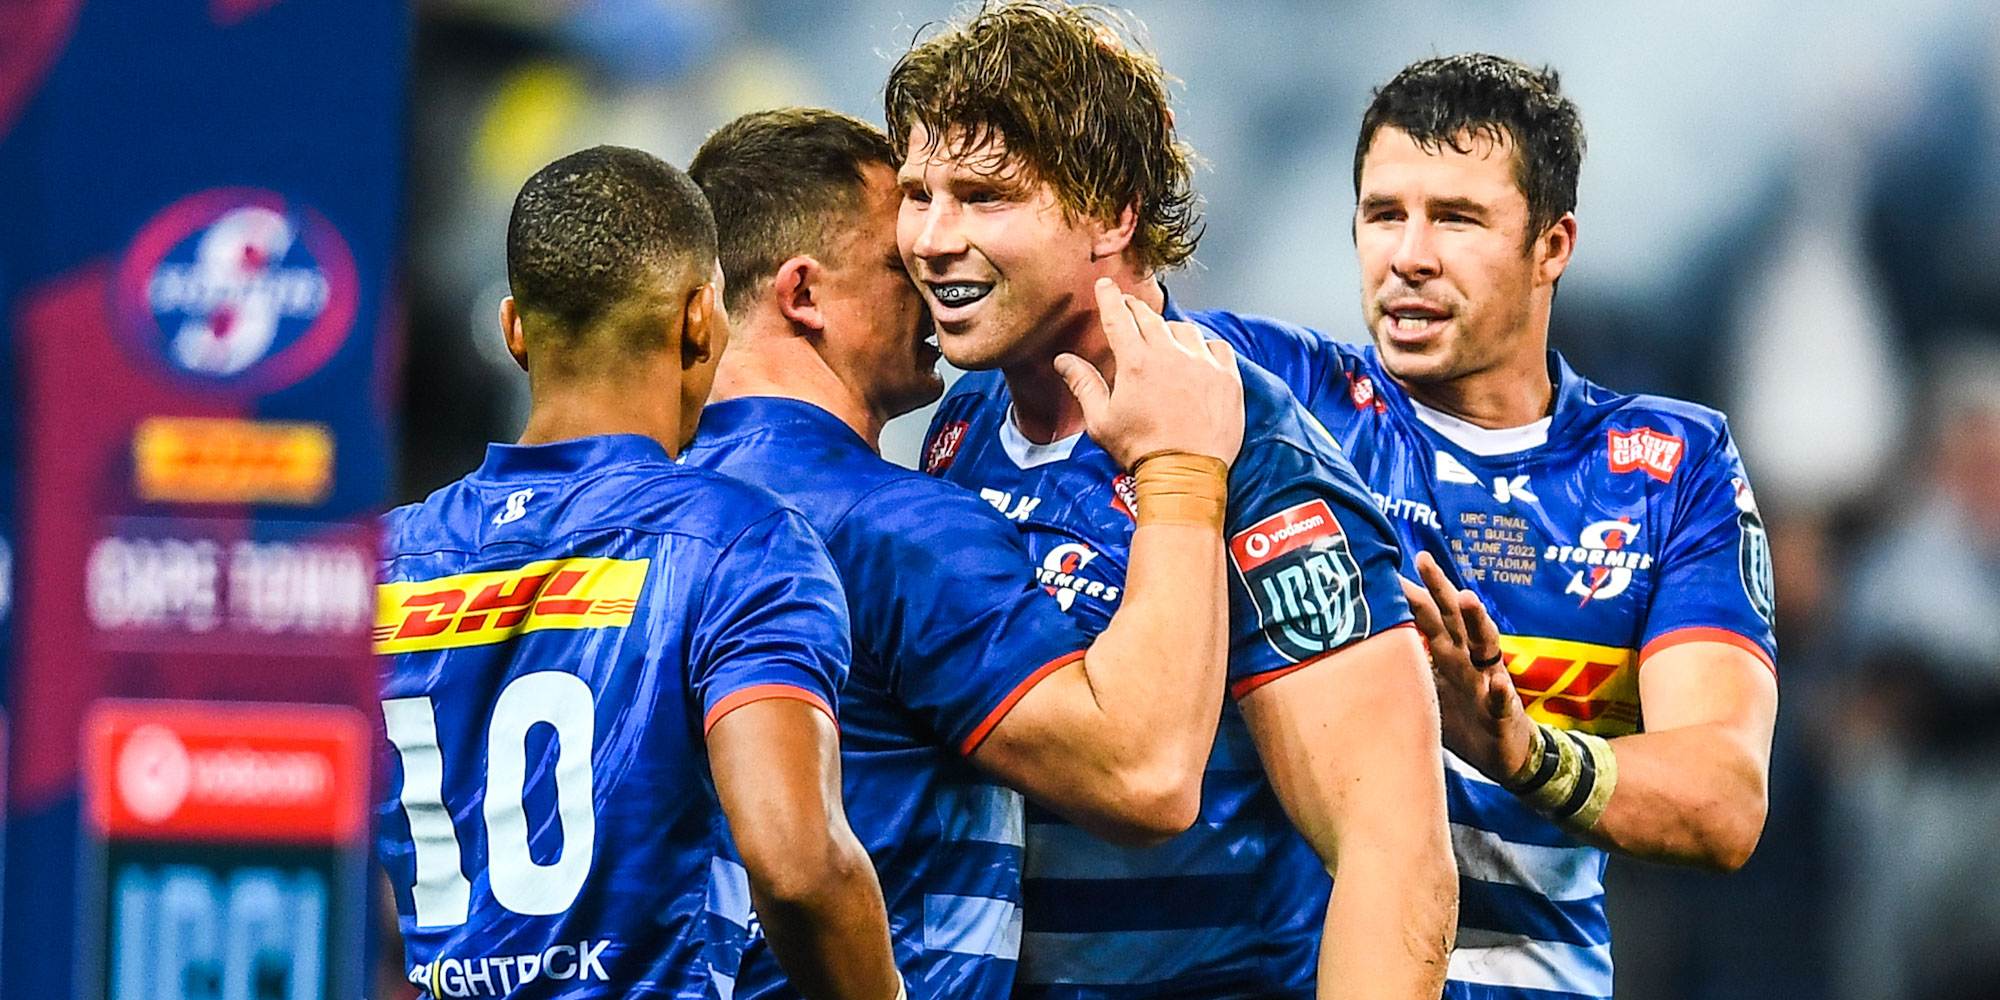 Evan Roos scored the DHL Stormers' first try that sparked their fightback in the Grand Final.